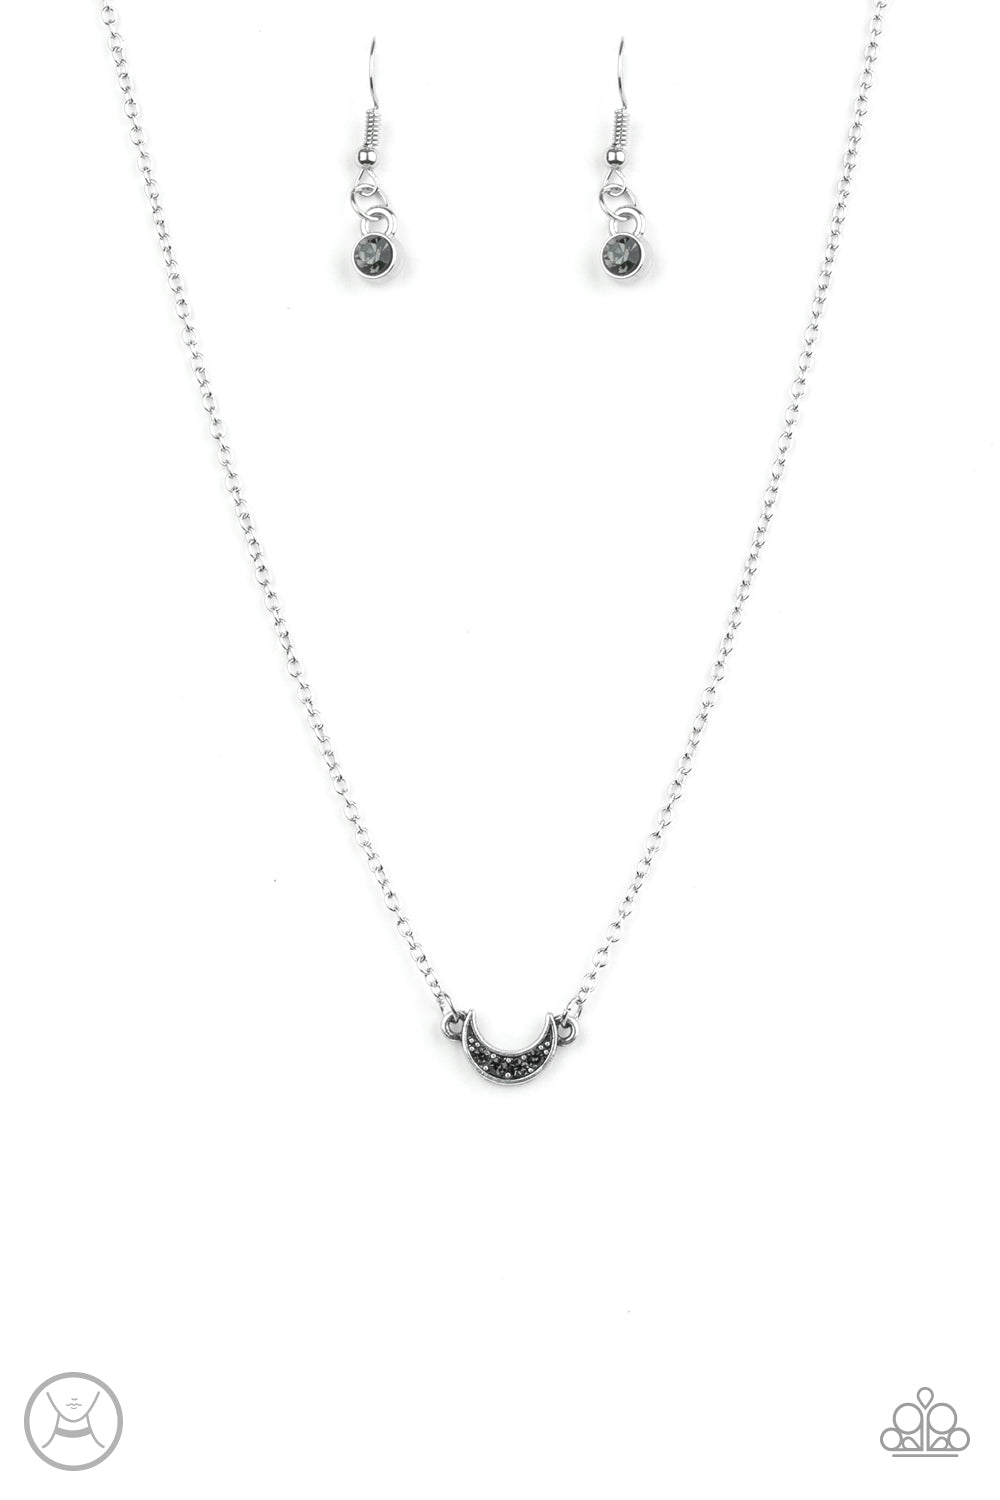 Paparazzi Promise The Moon Silver Choker Necklace